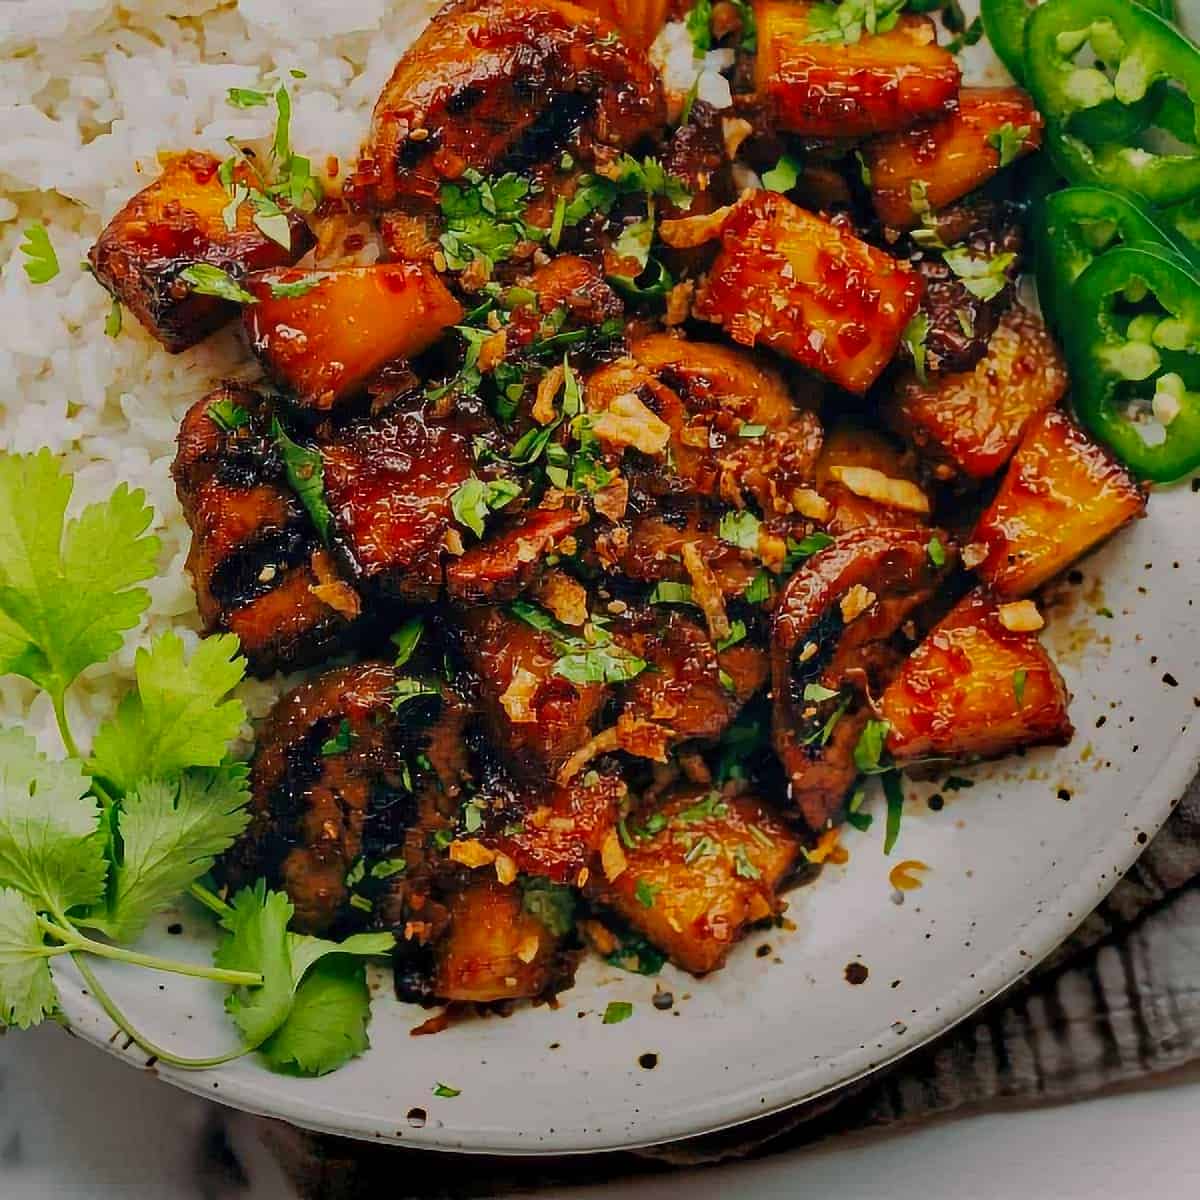 10. Pineapple Pork with Coconut Rice